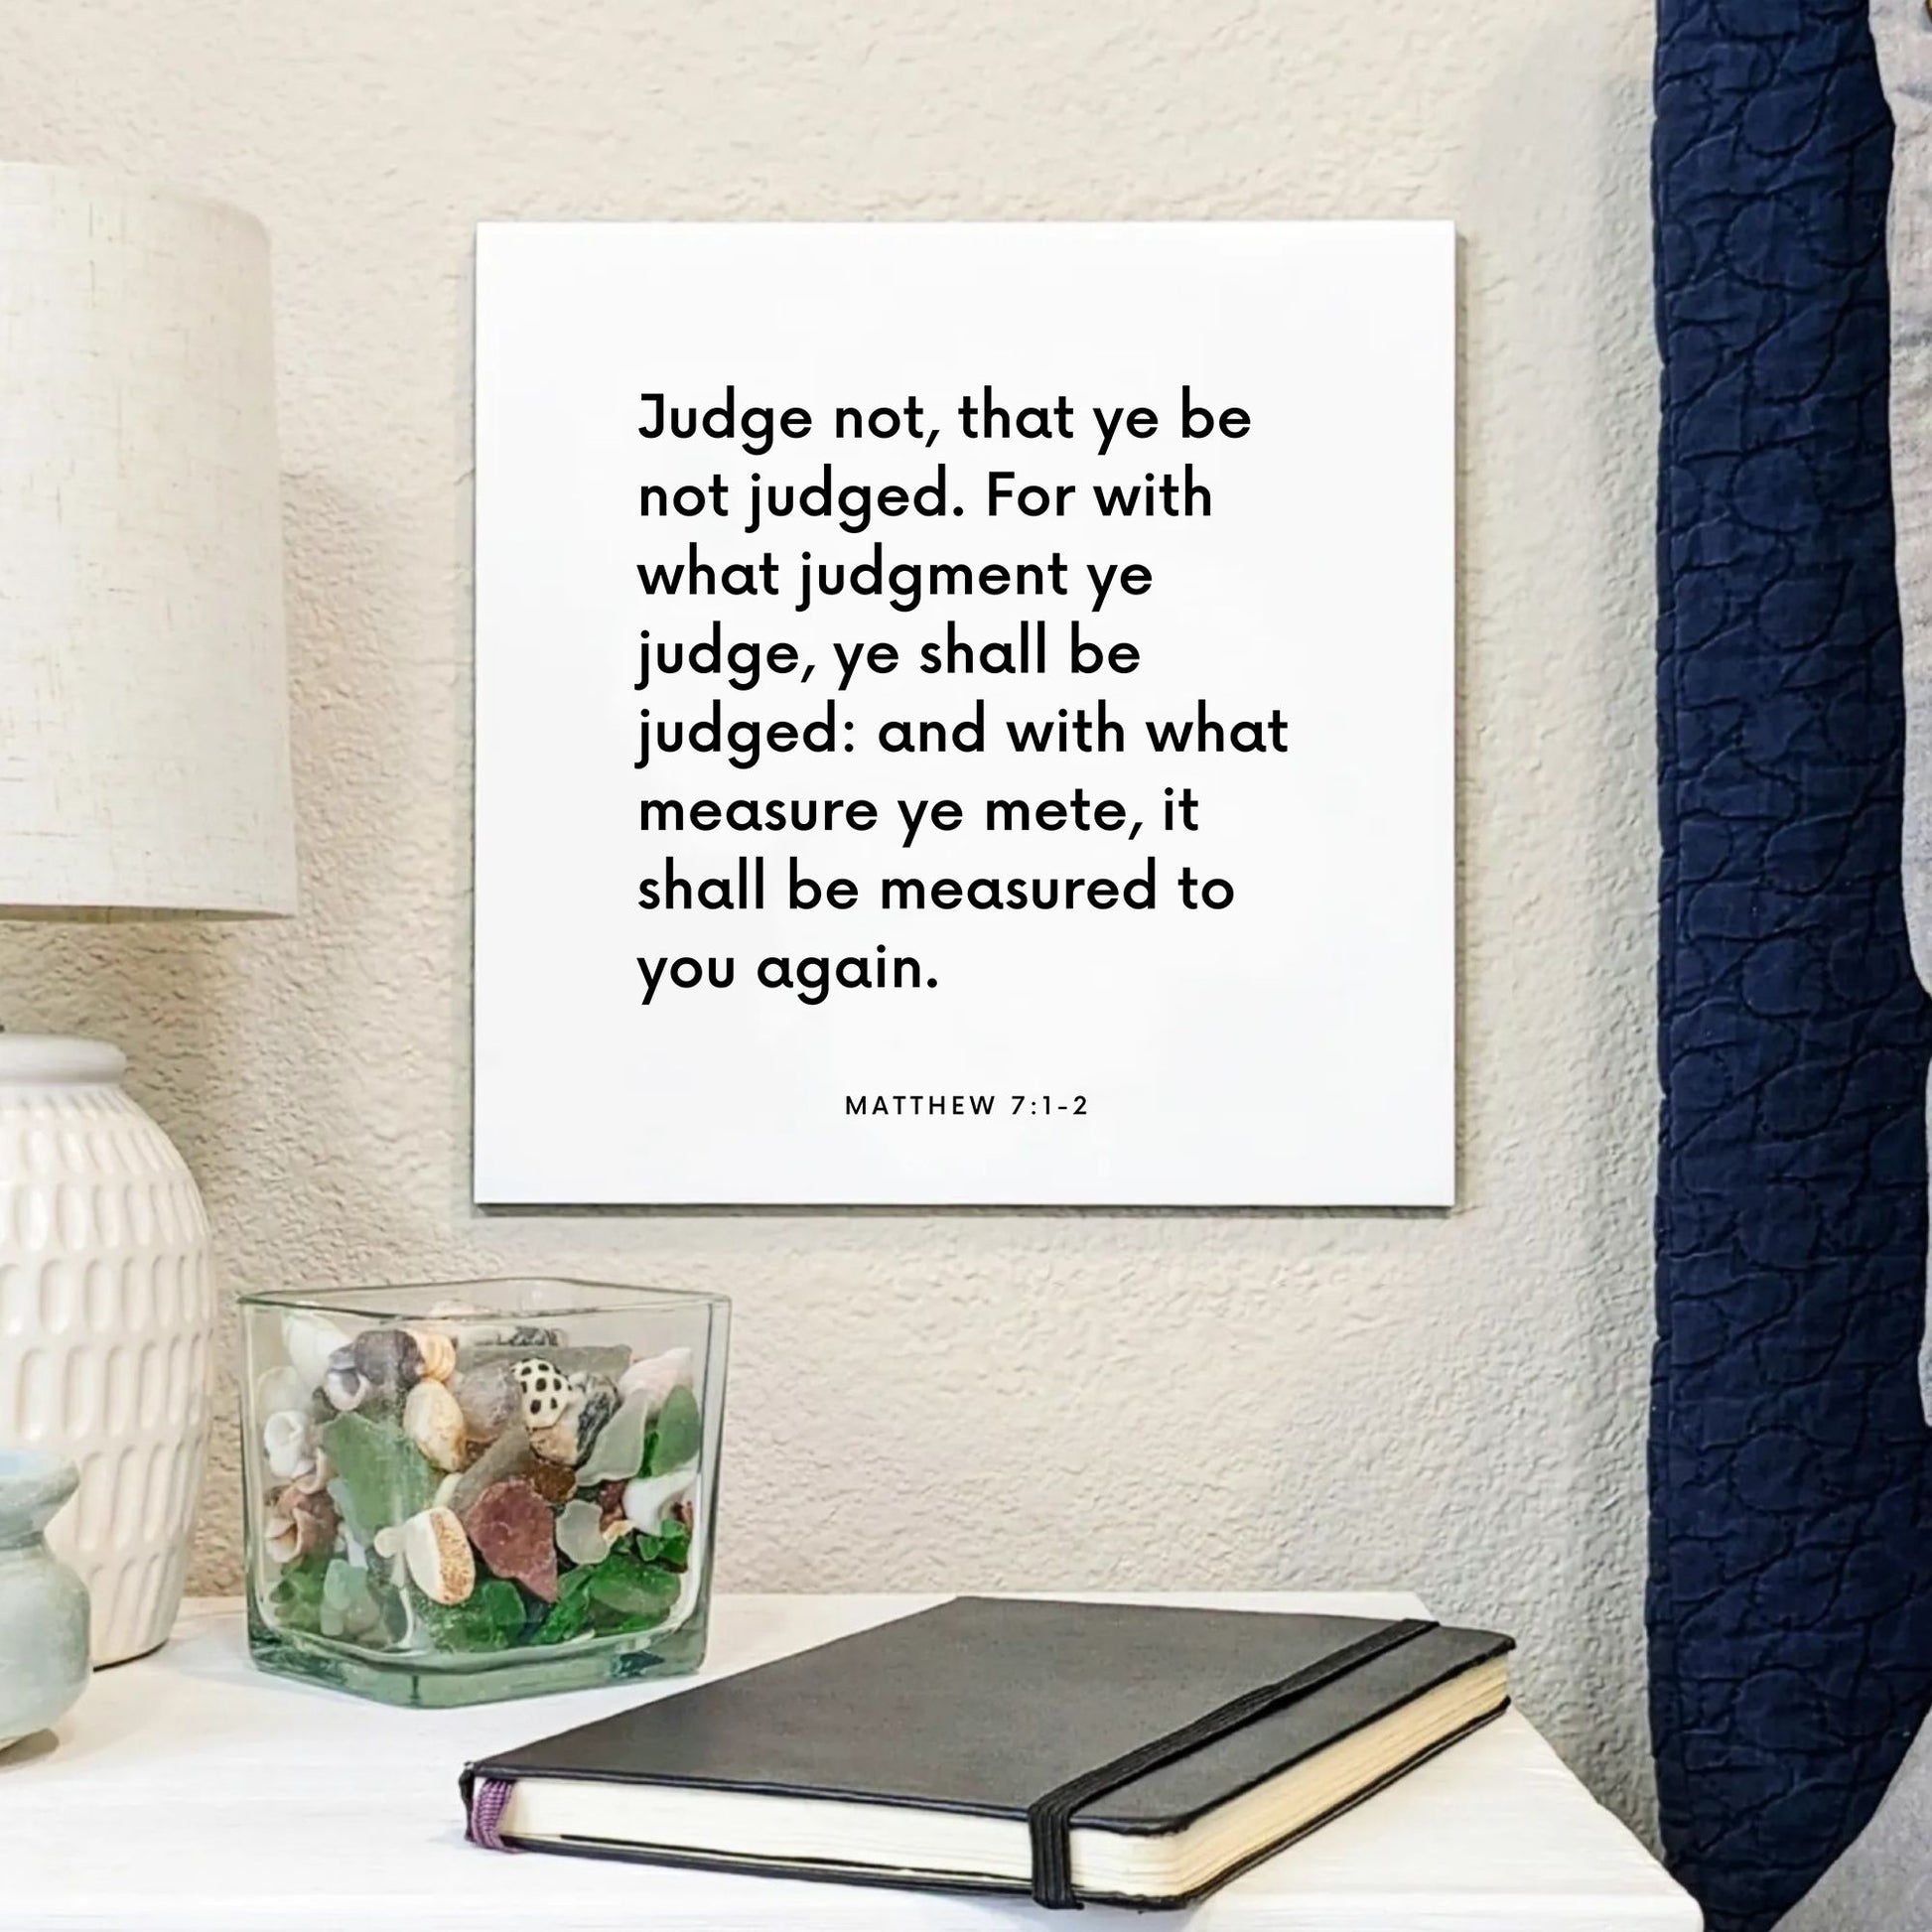 Bedside mouting of the scripture tile for Matthew 7:1-2 - "Judge not, that ye be not judged"